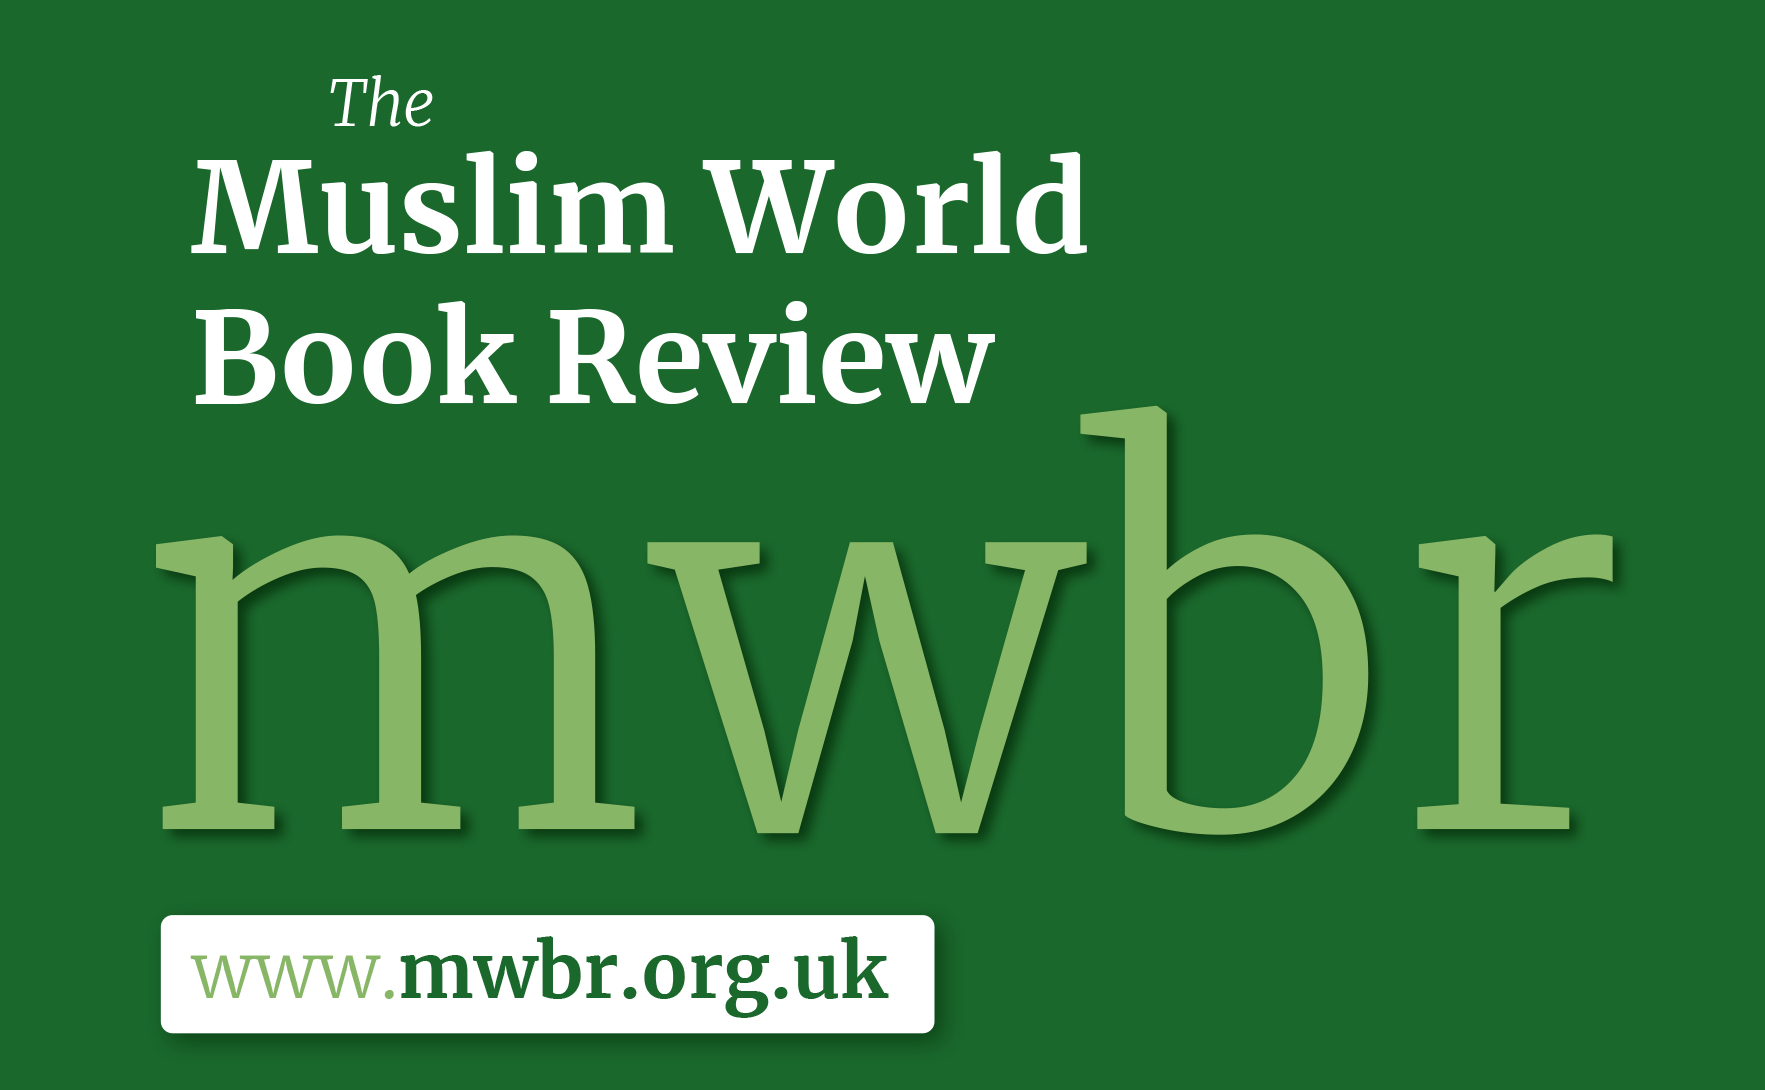 The Muslim World Book Review